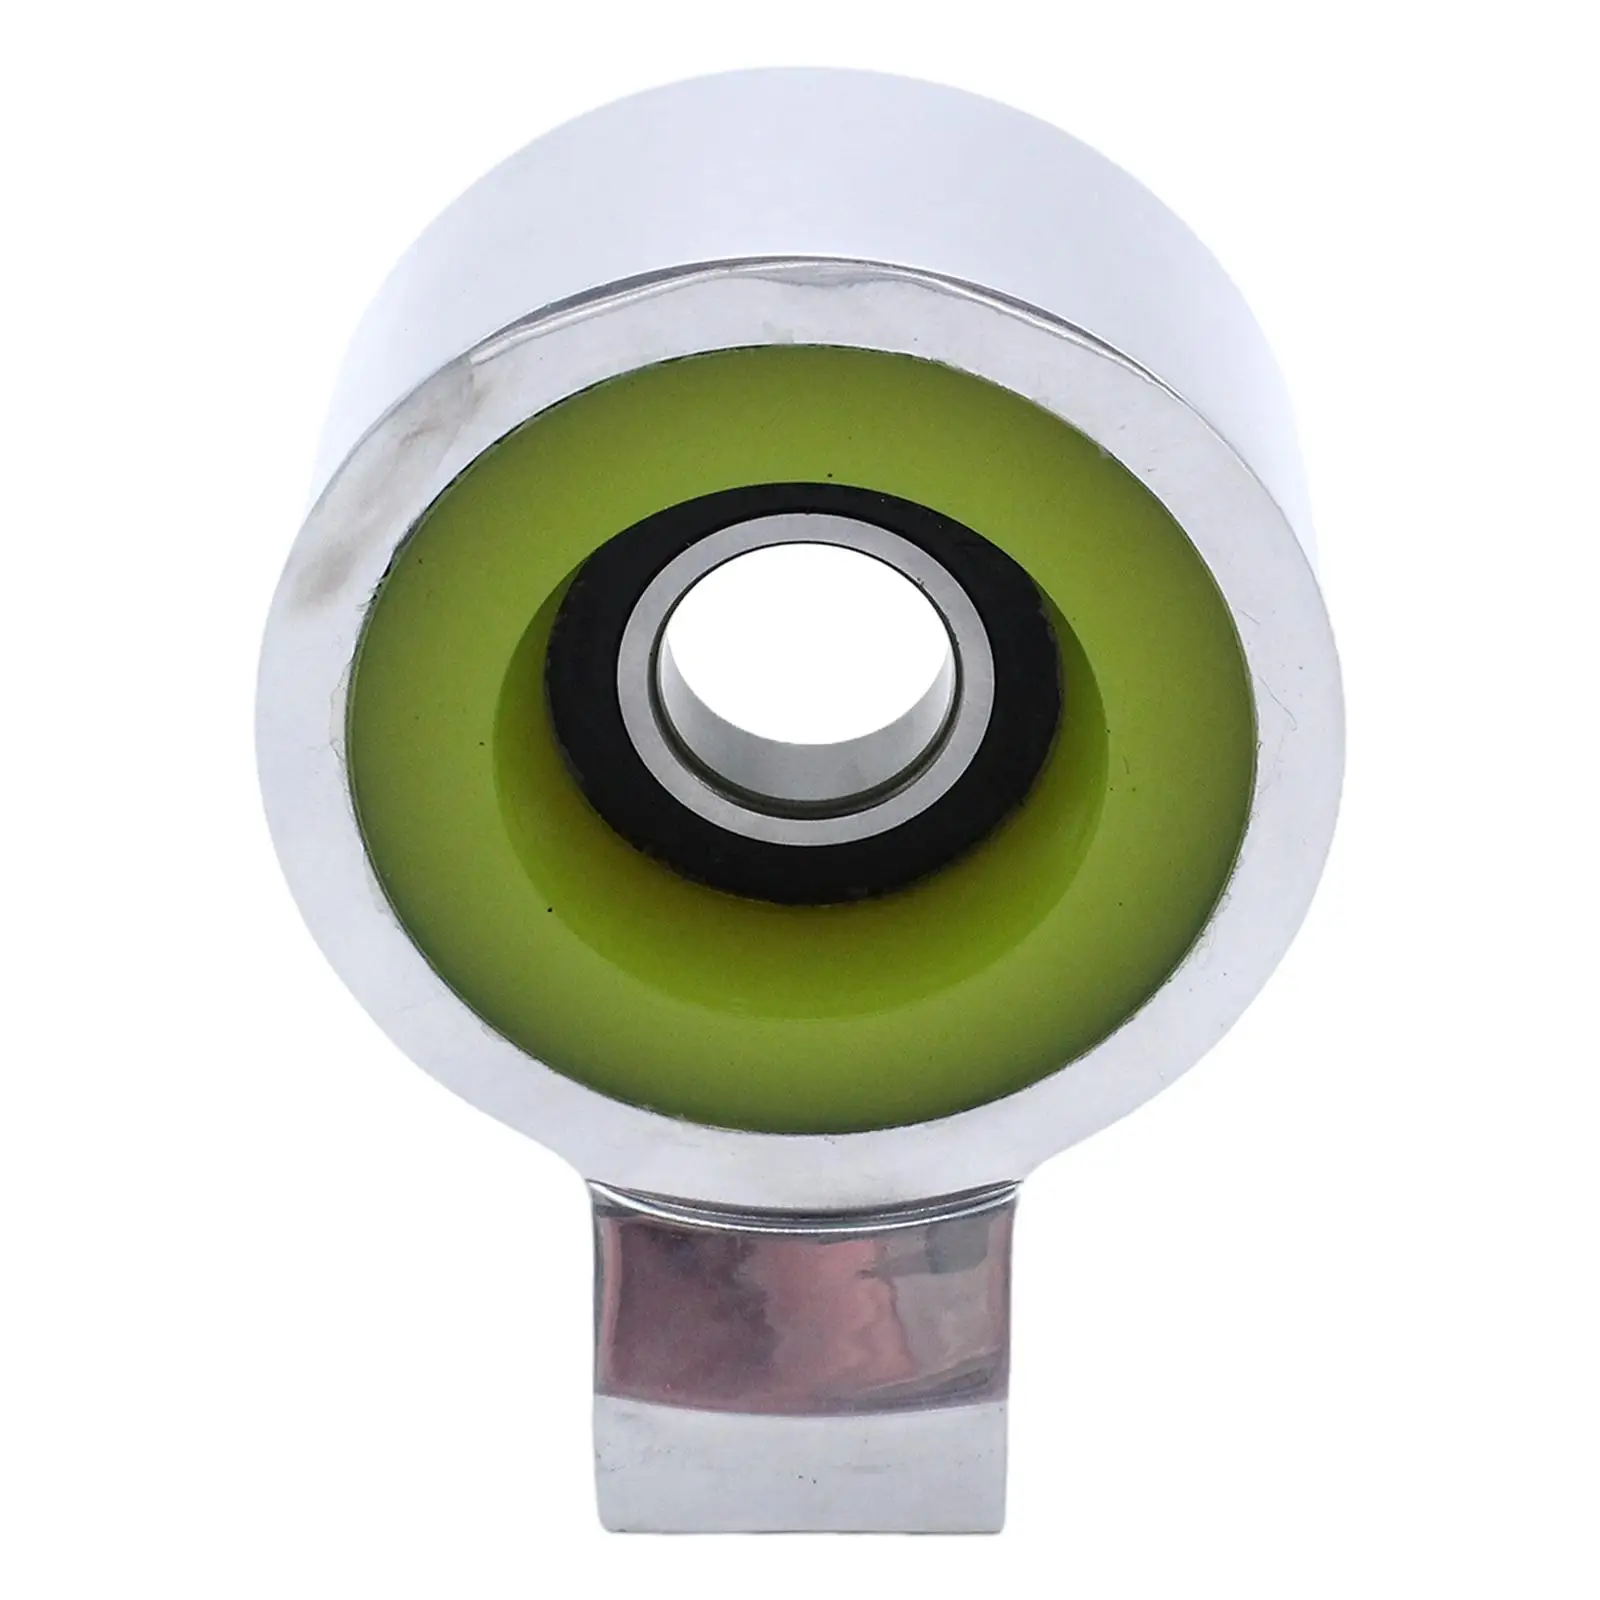 Eavy Duty Carrier Bearing Aluminum Car Parts Fit for Durable